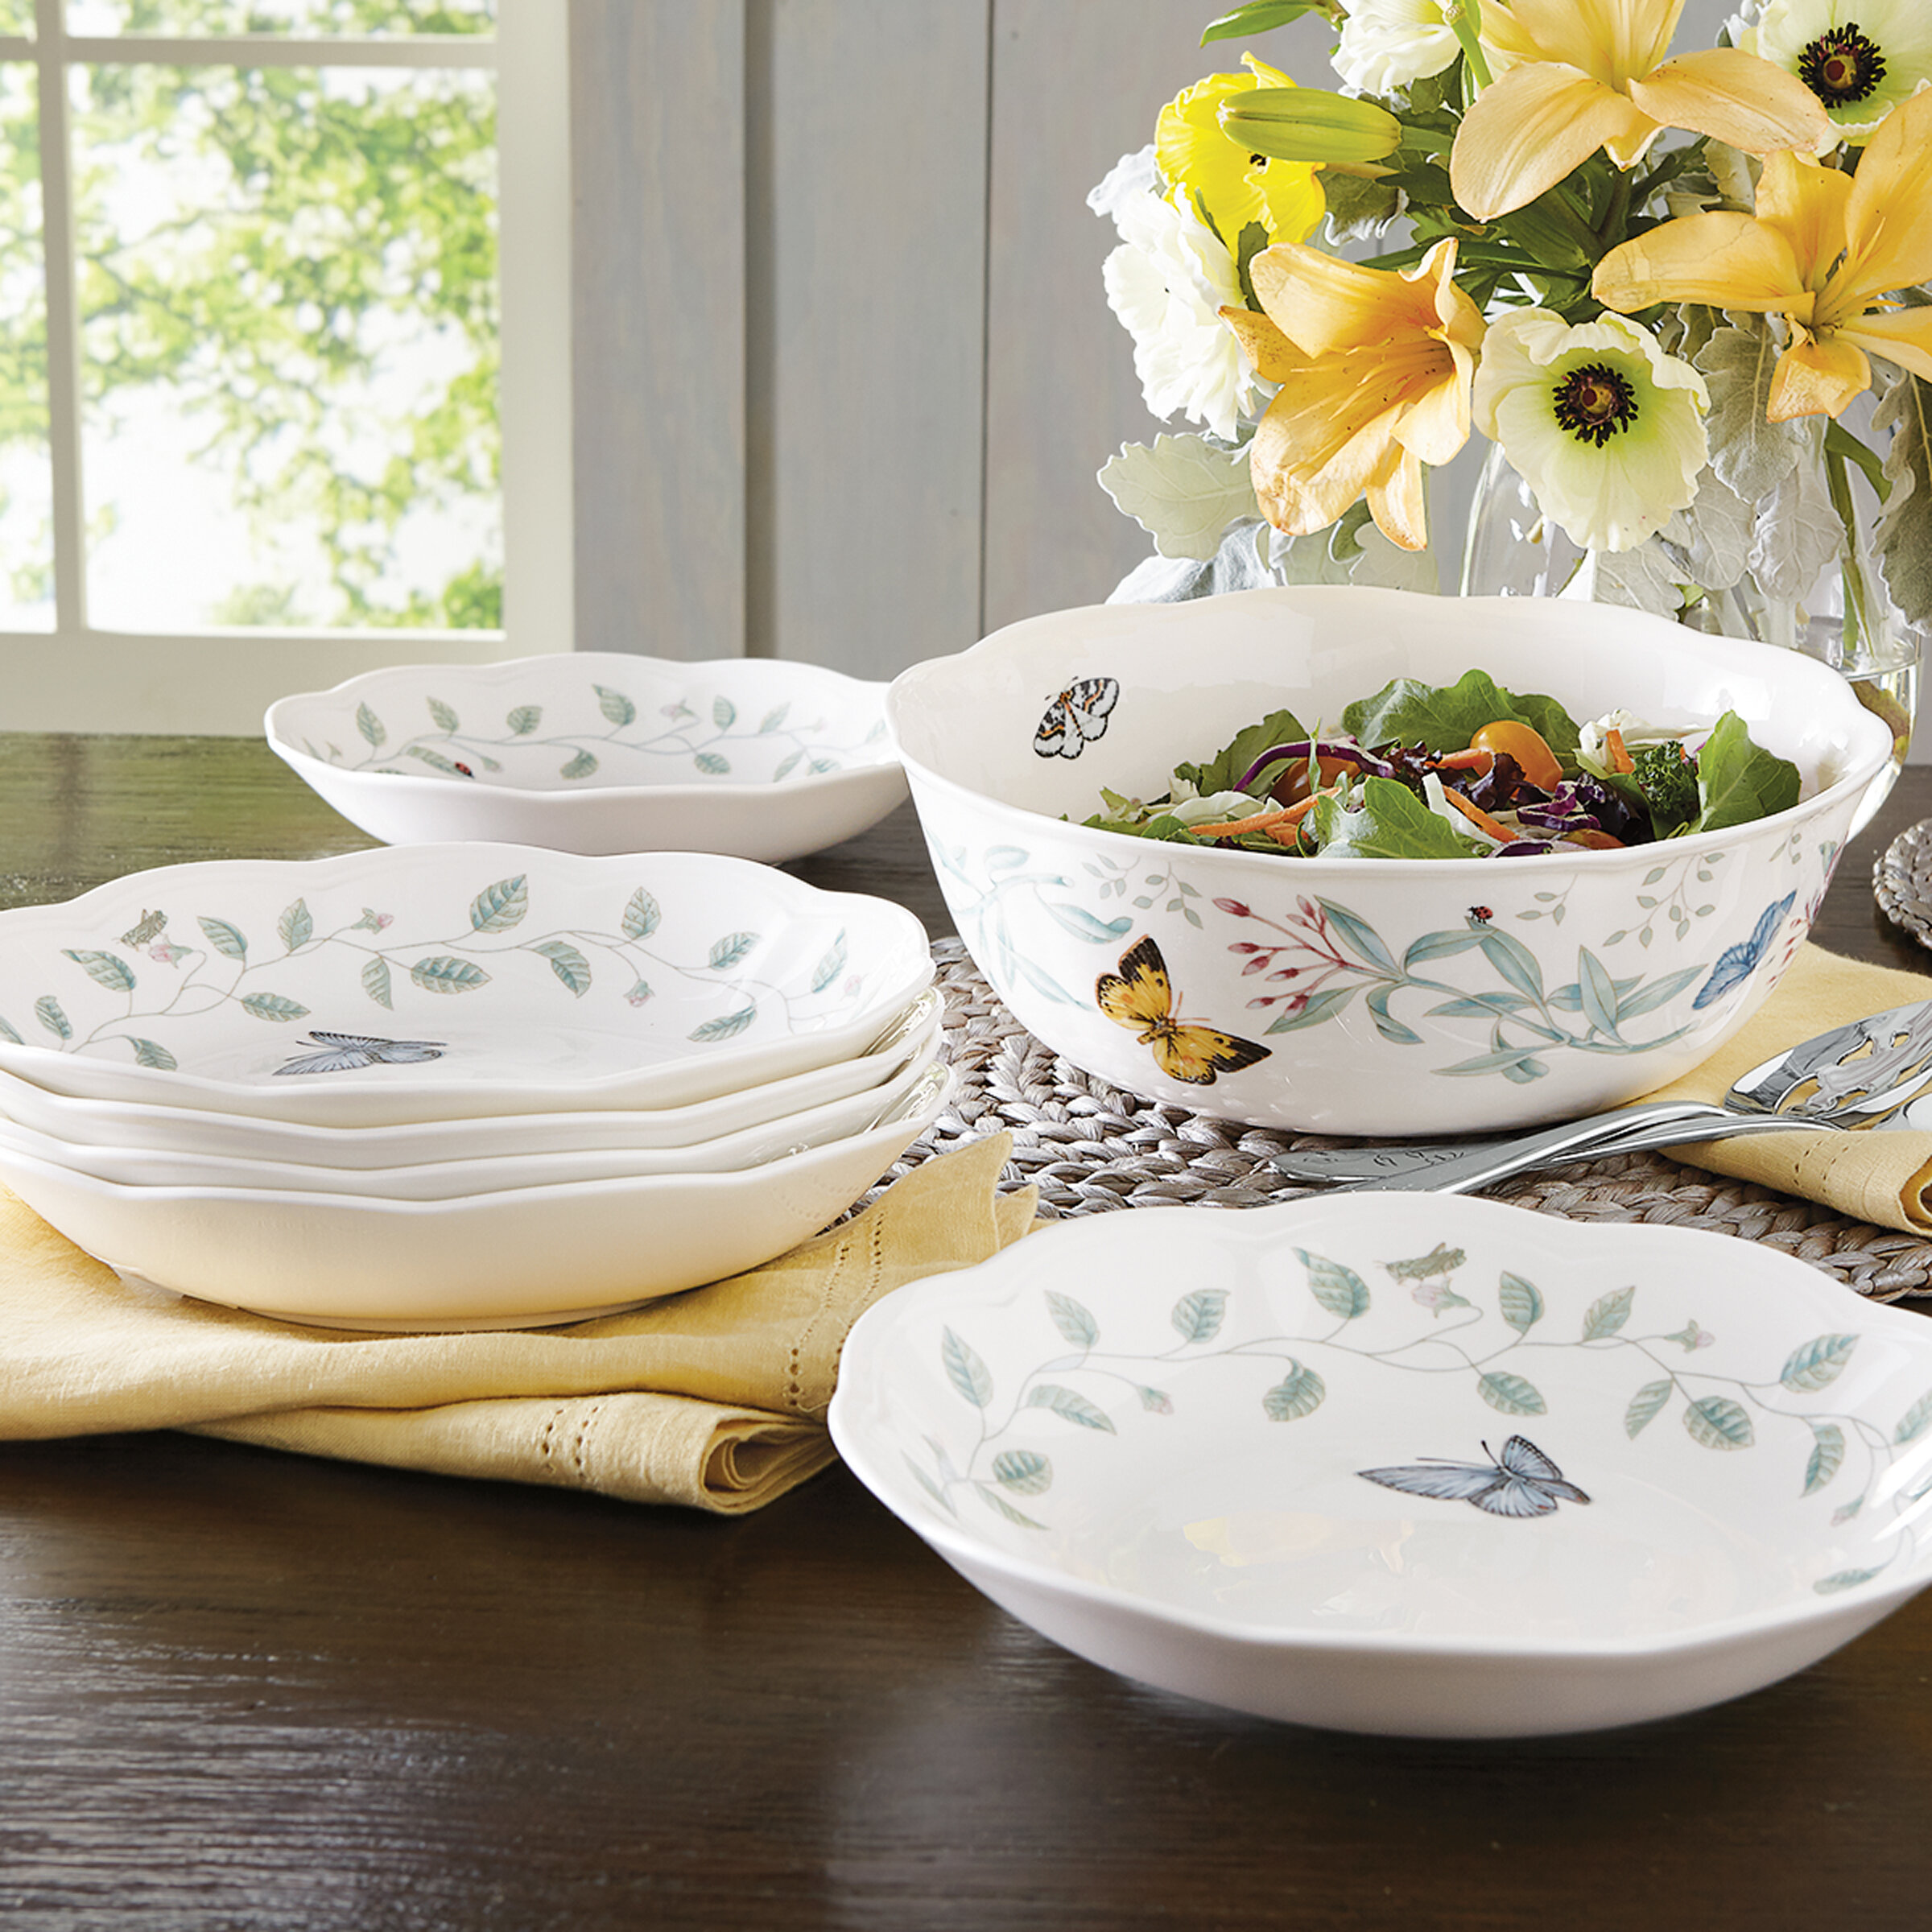 Set of 4 Lenox Butterfly Meadow Melamine All Purpose Bowls White 